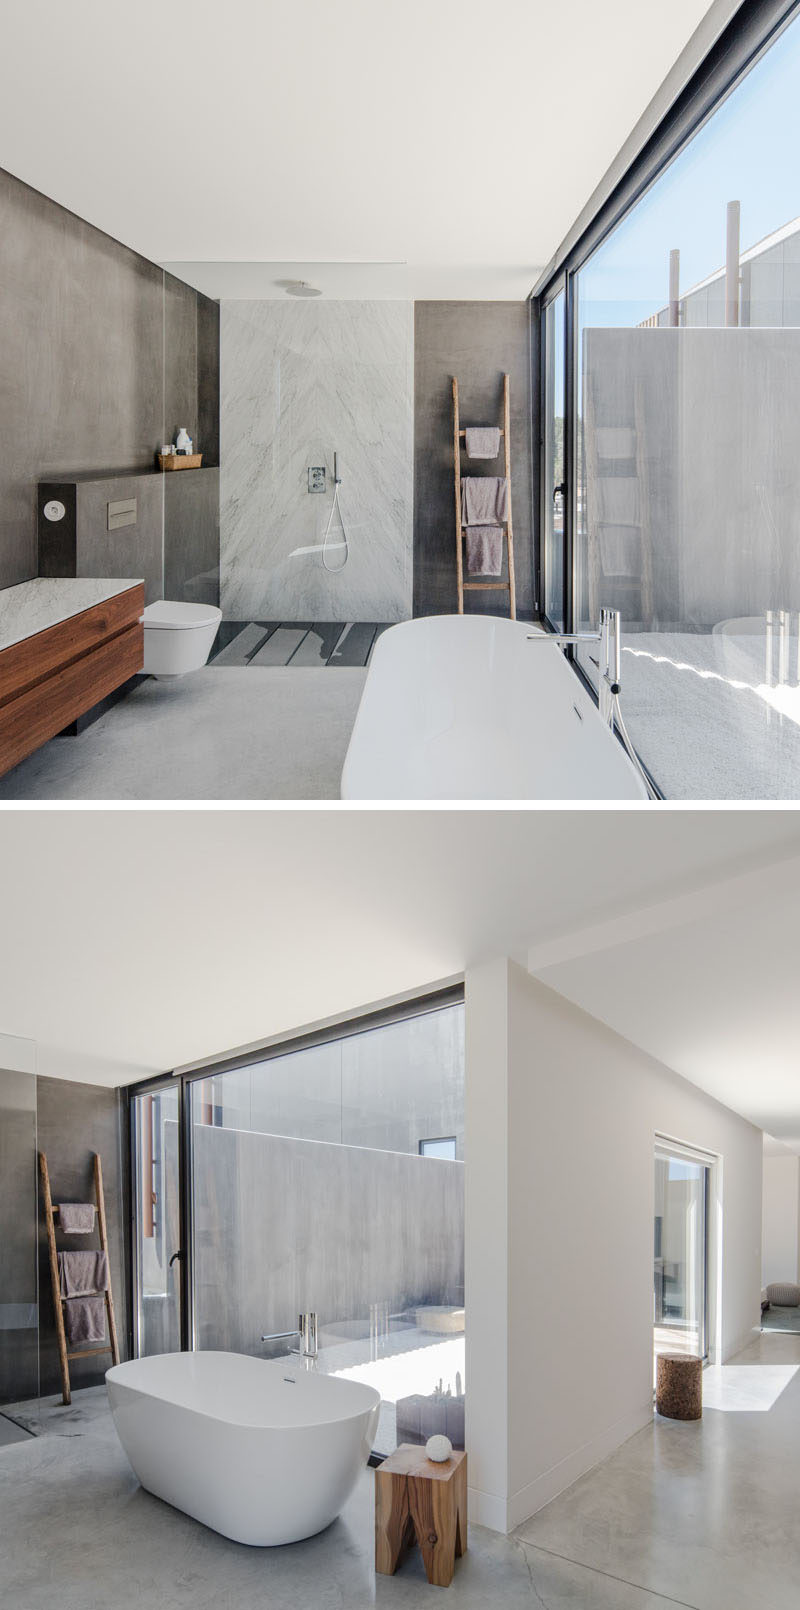 In this master bathroom, there's a large shower behind a glass screen, while a freestanding oval bathtub looks out onto the courtyard. #MasterBathroom #Windows #BathroomDesign